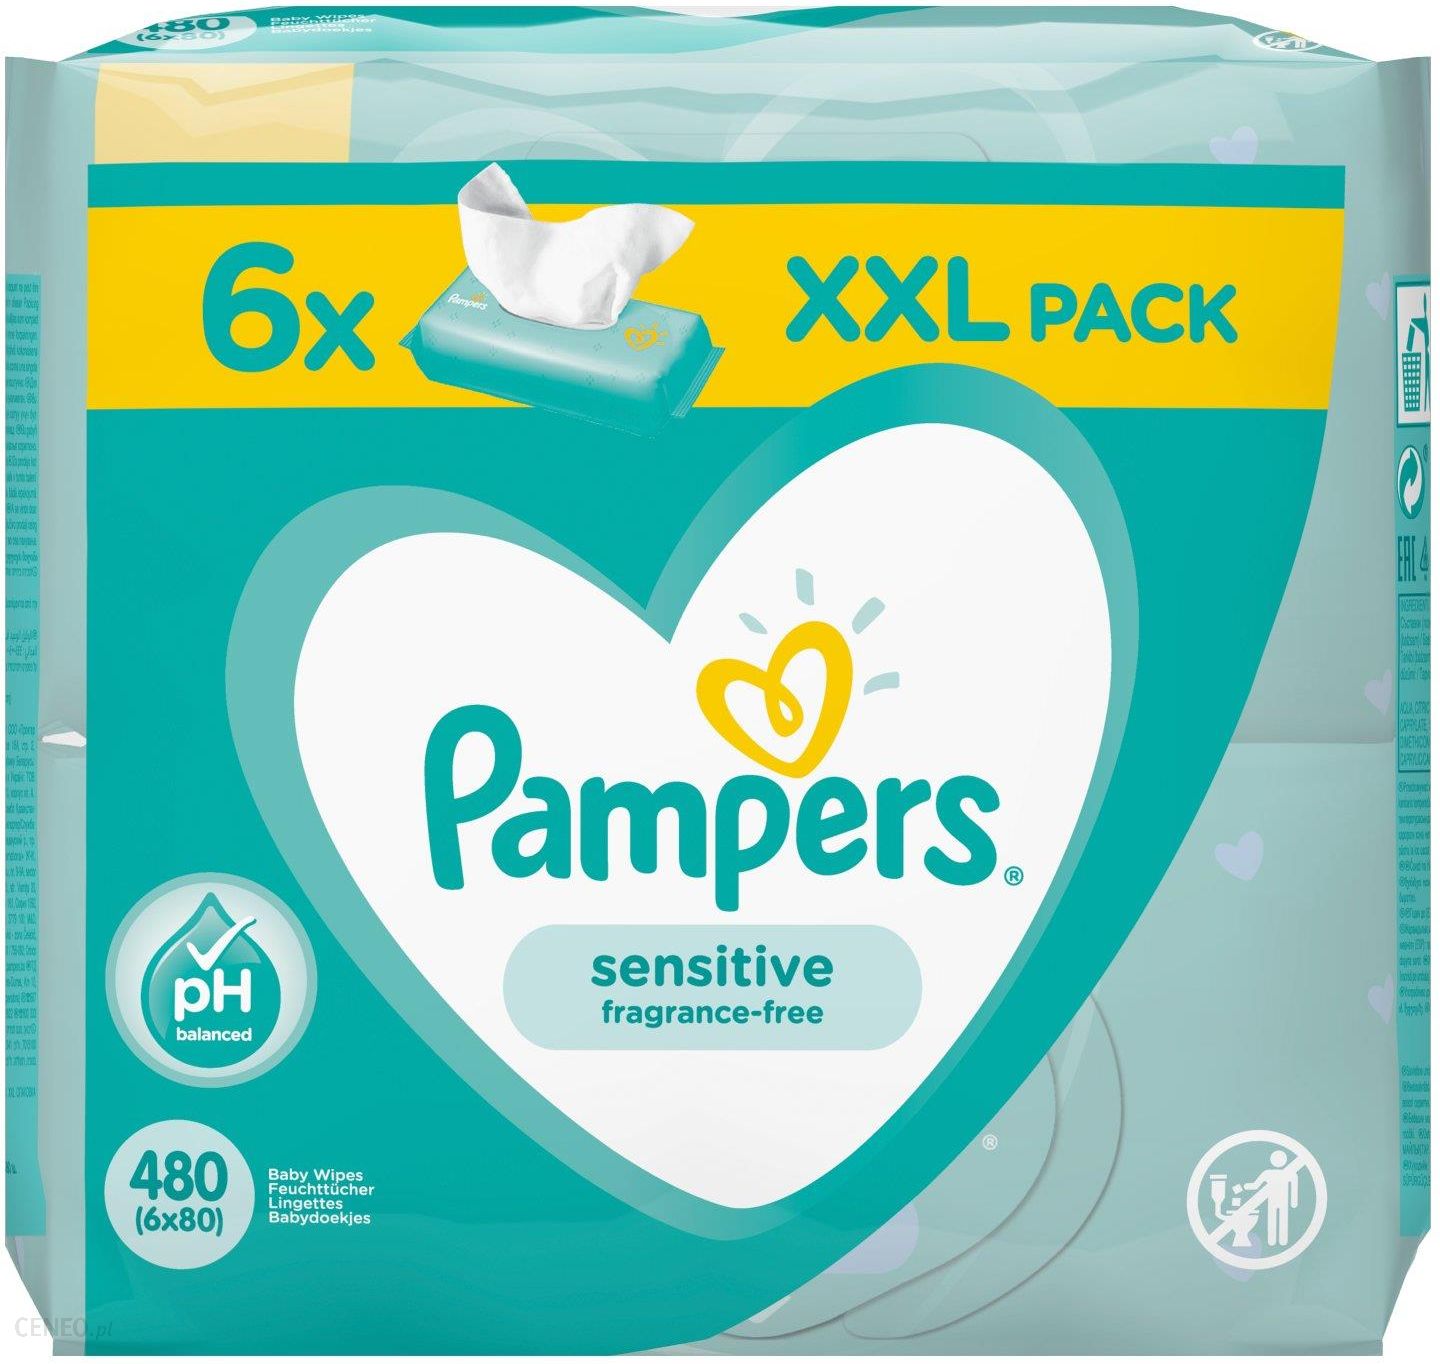 pampers pants 5 152